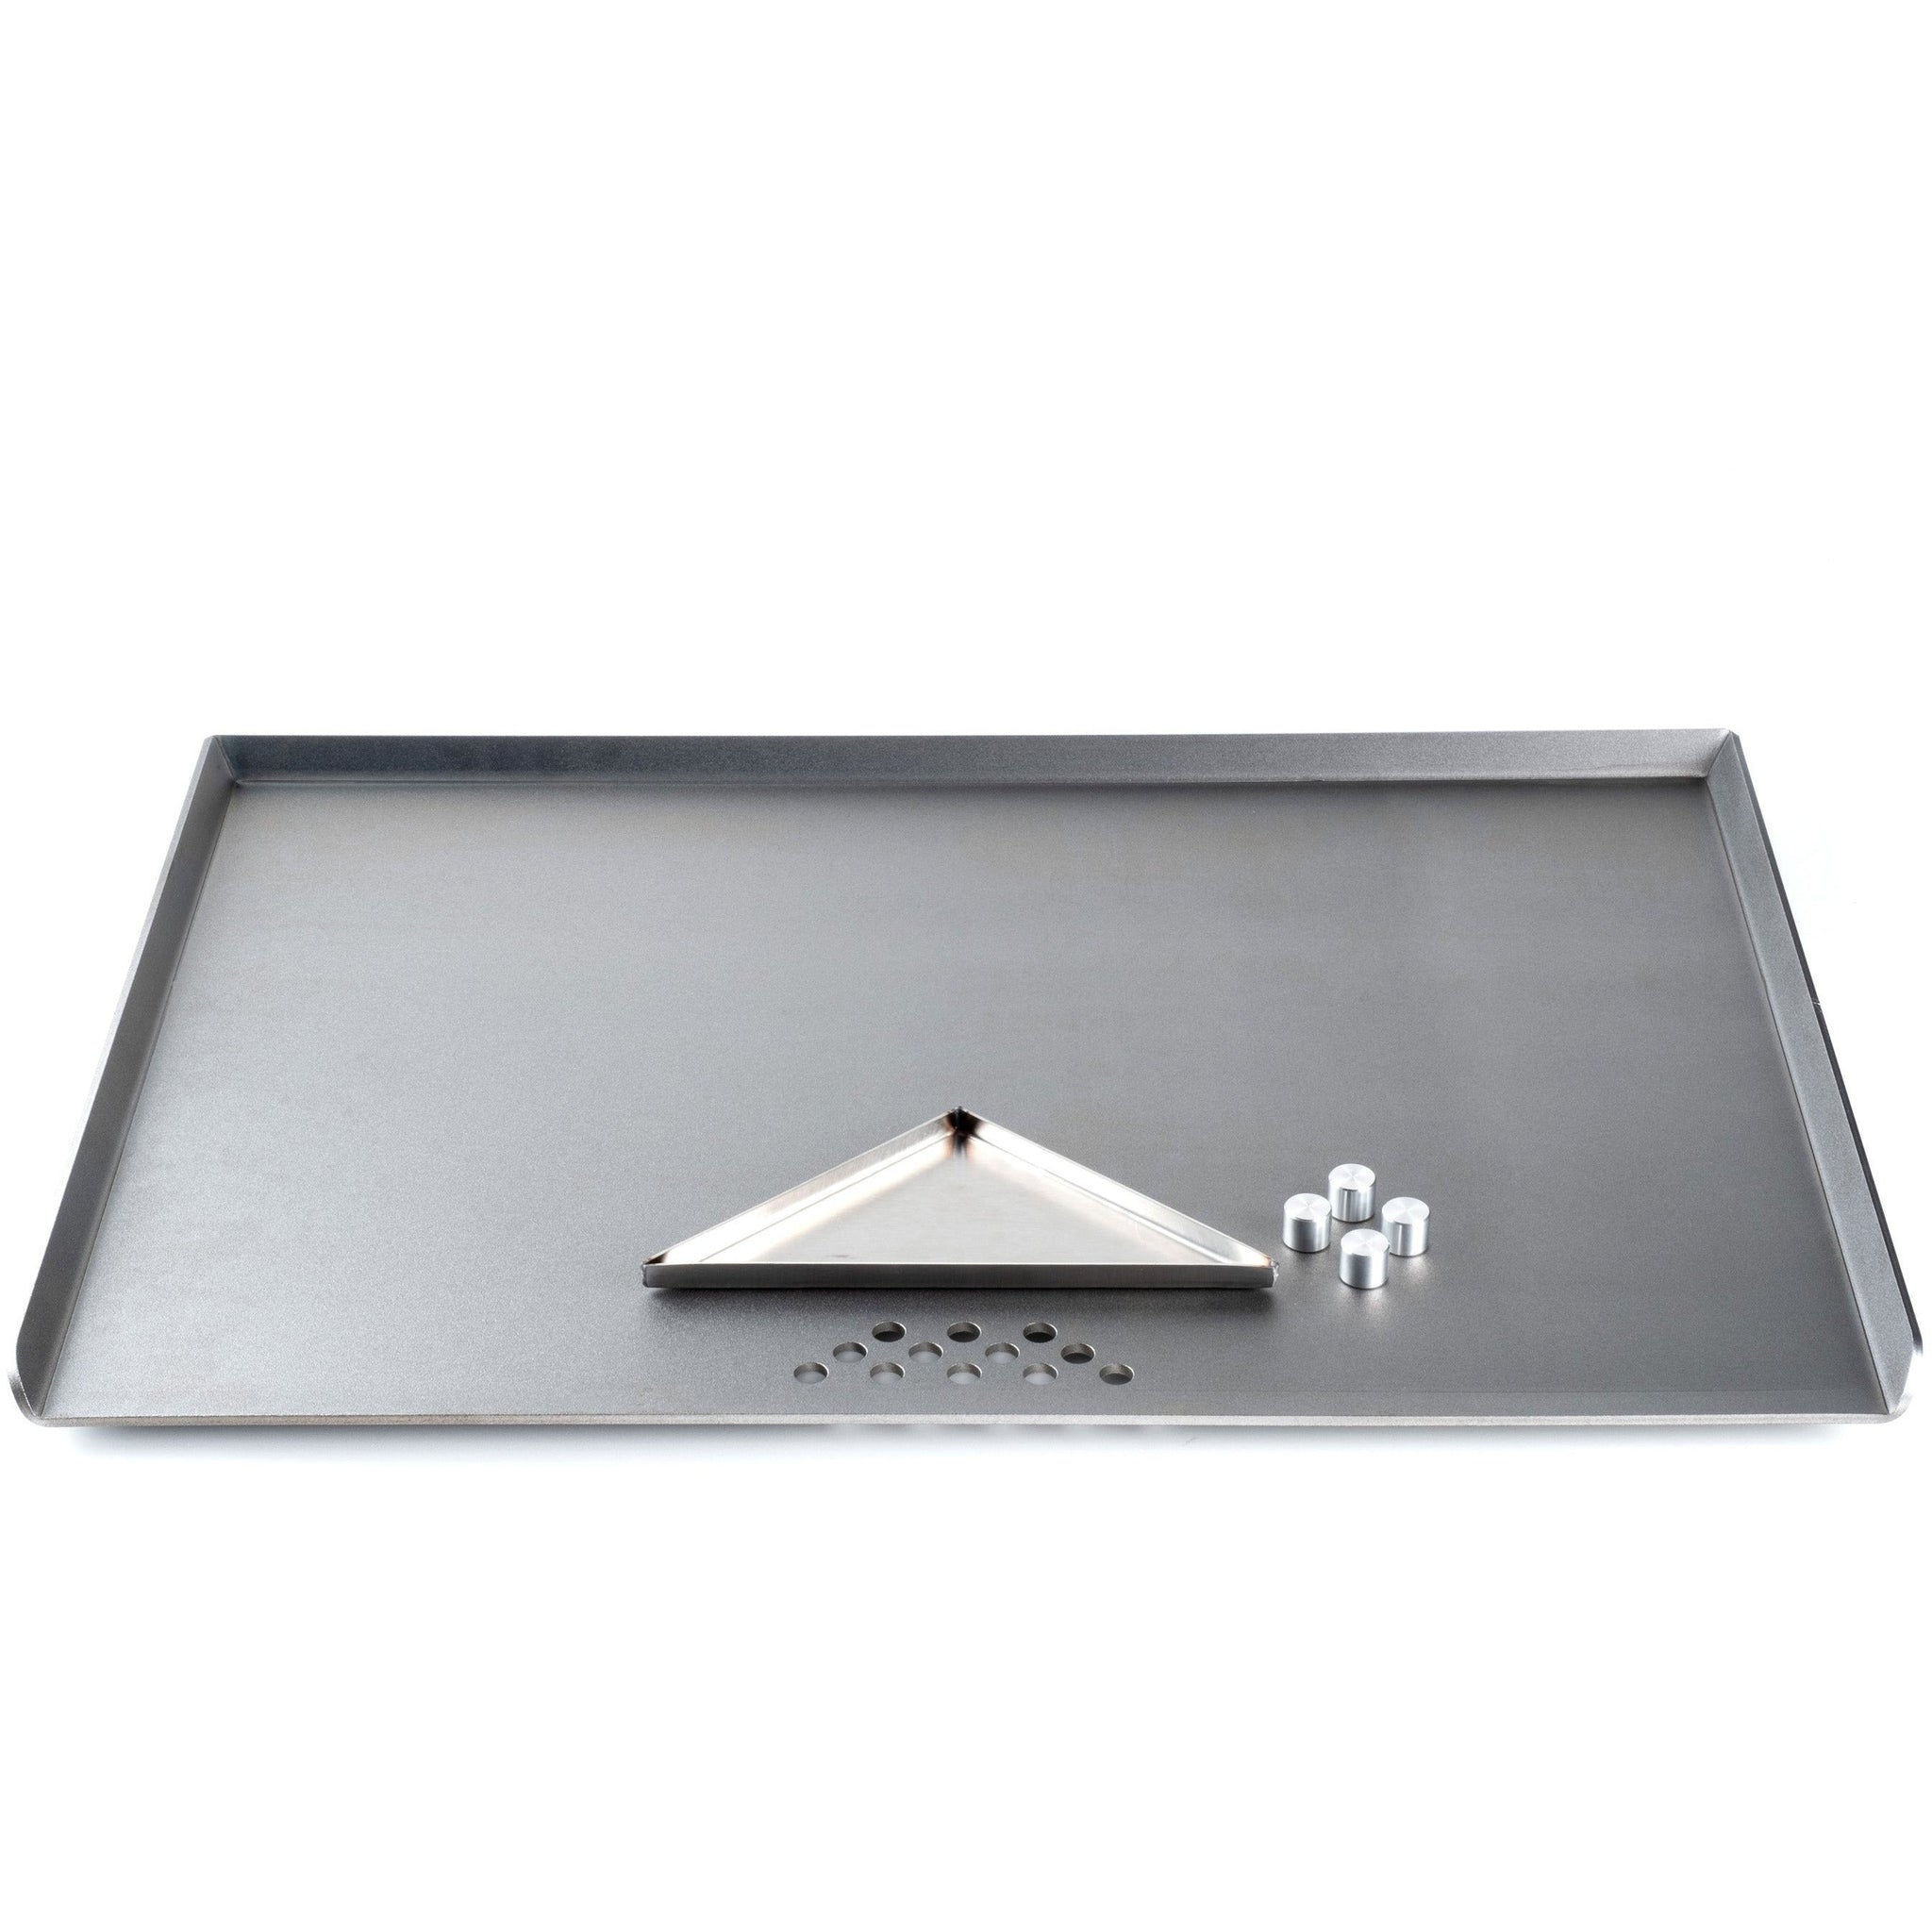 Glass Ceramic Stove Flat Top Grill, Restaurant quality, with all the  comforts of home. Our Flat Top Grill is compatible with electric, gas, and  glass ceramic stoves., By Steelmade